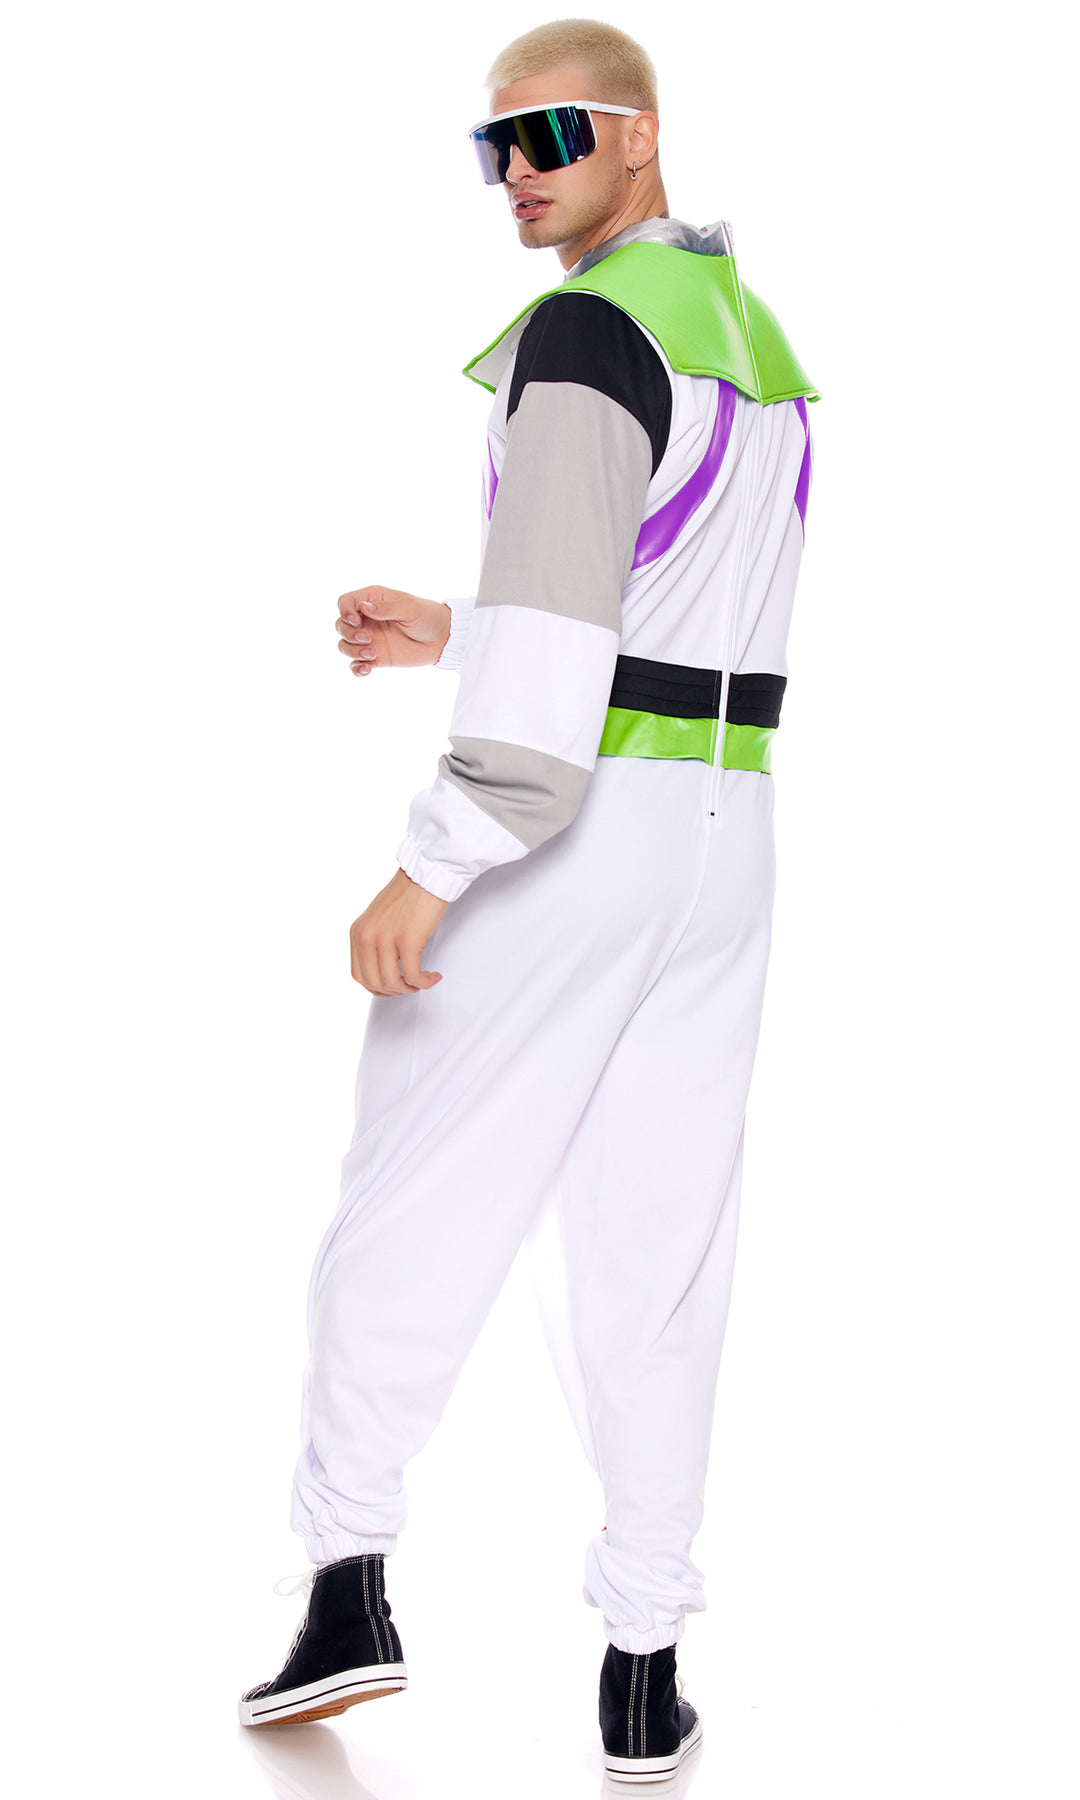 A Real Buzz Men's Movie Character Costume